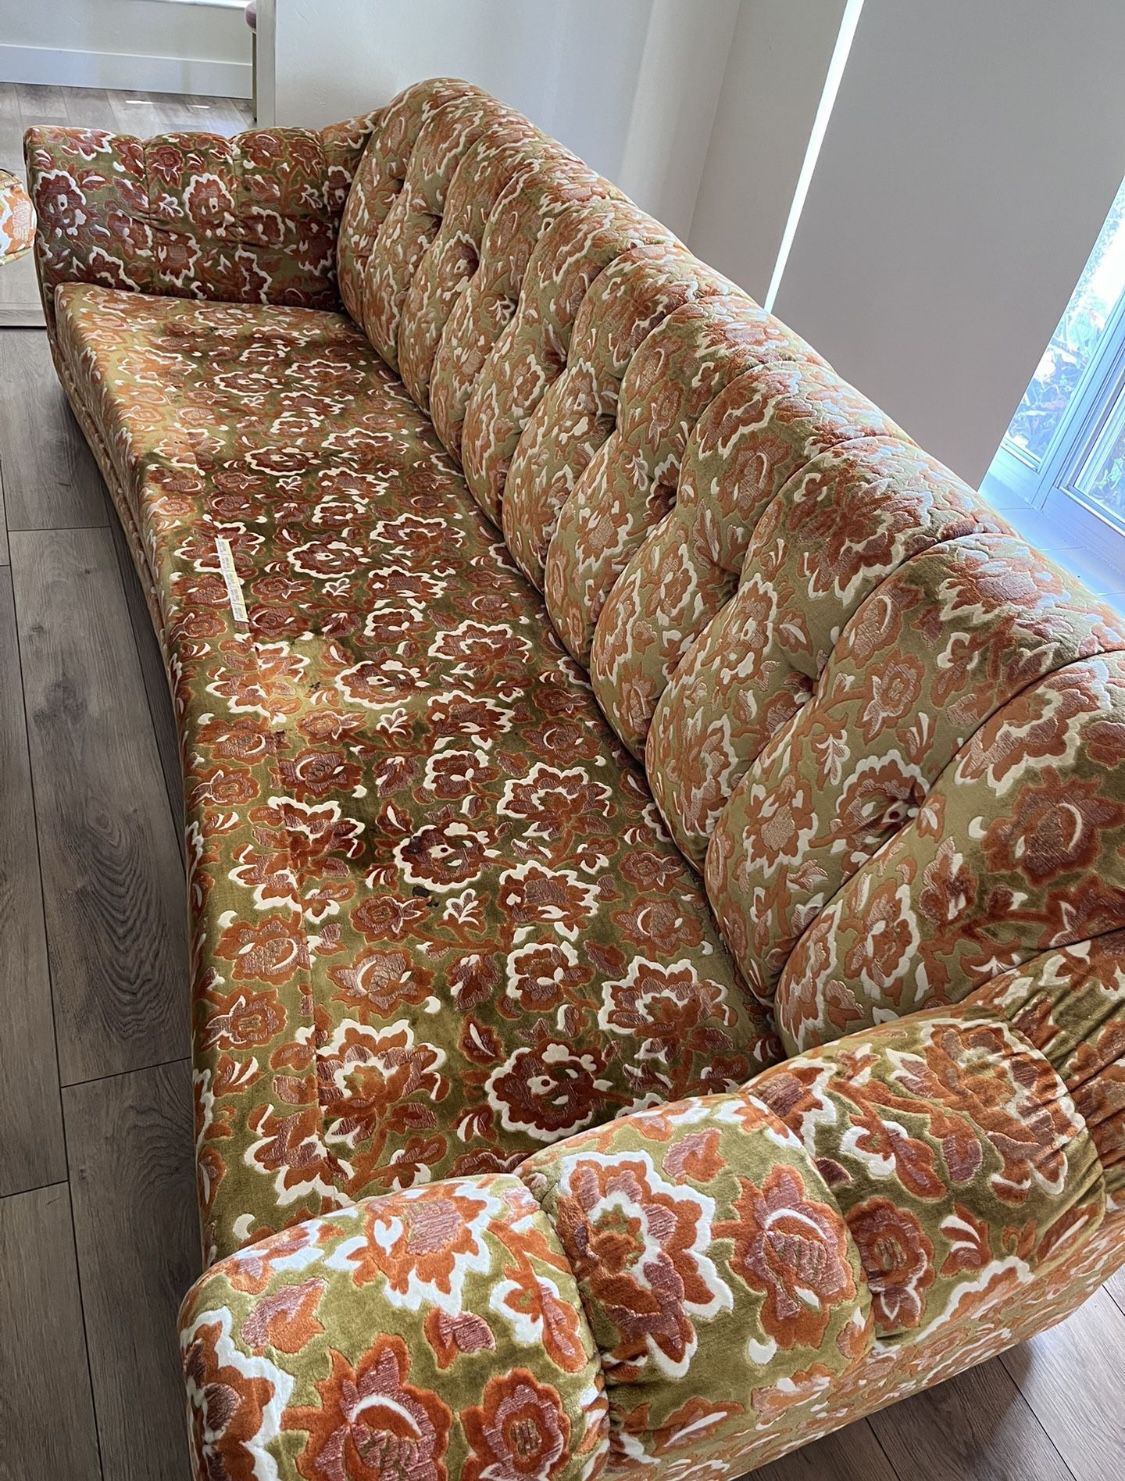 Vintage 70’s floral Couch